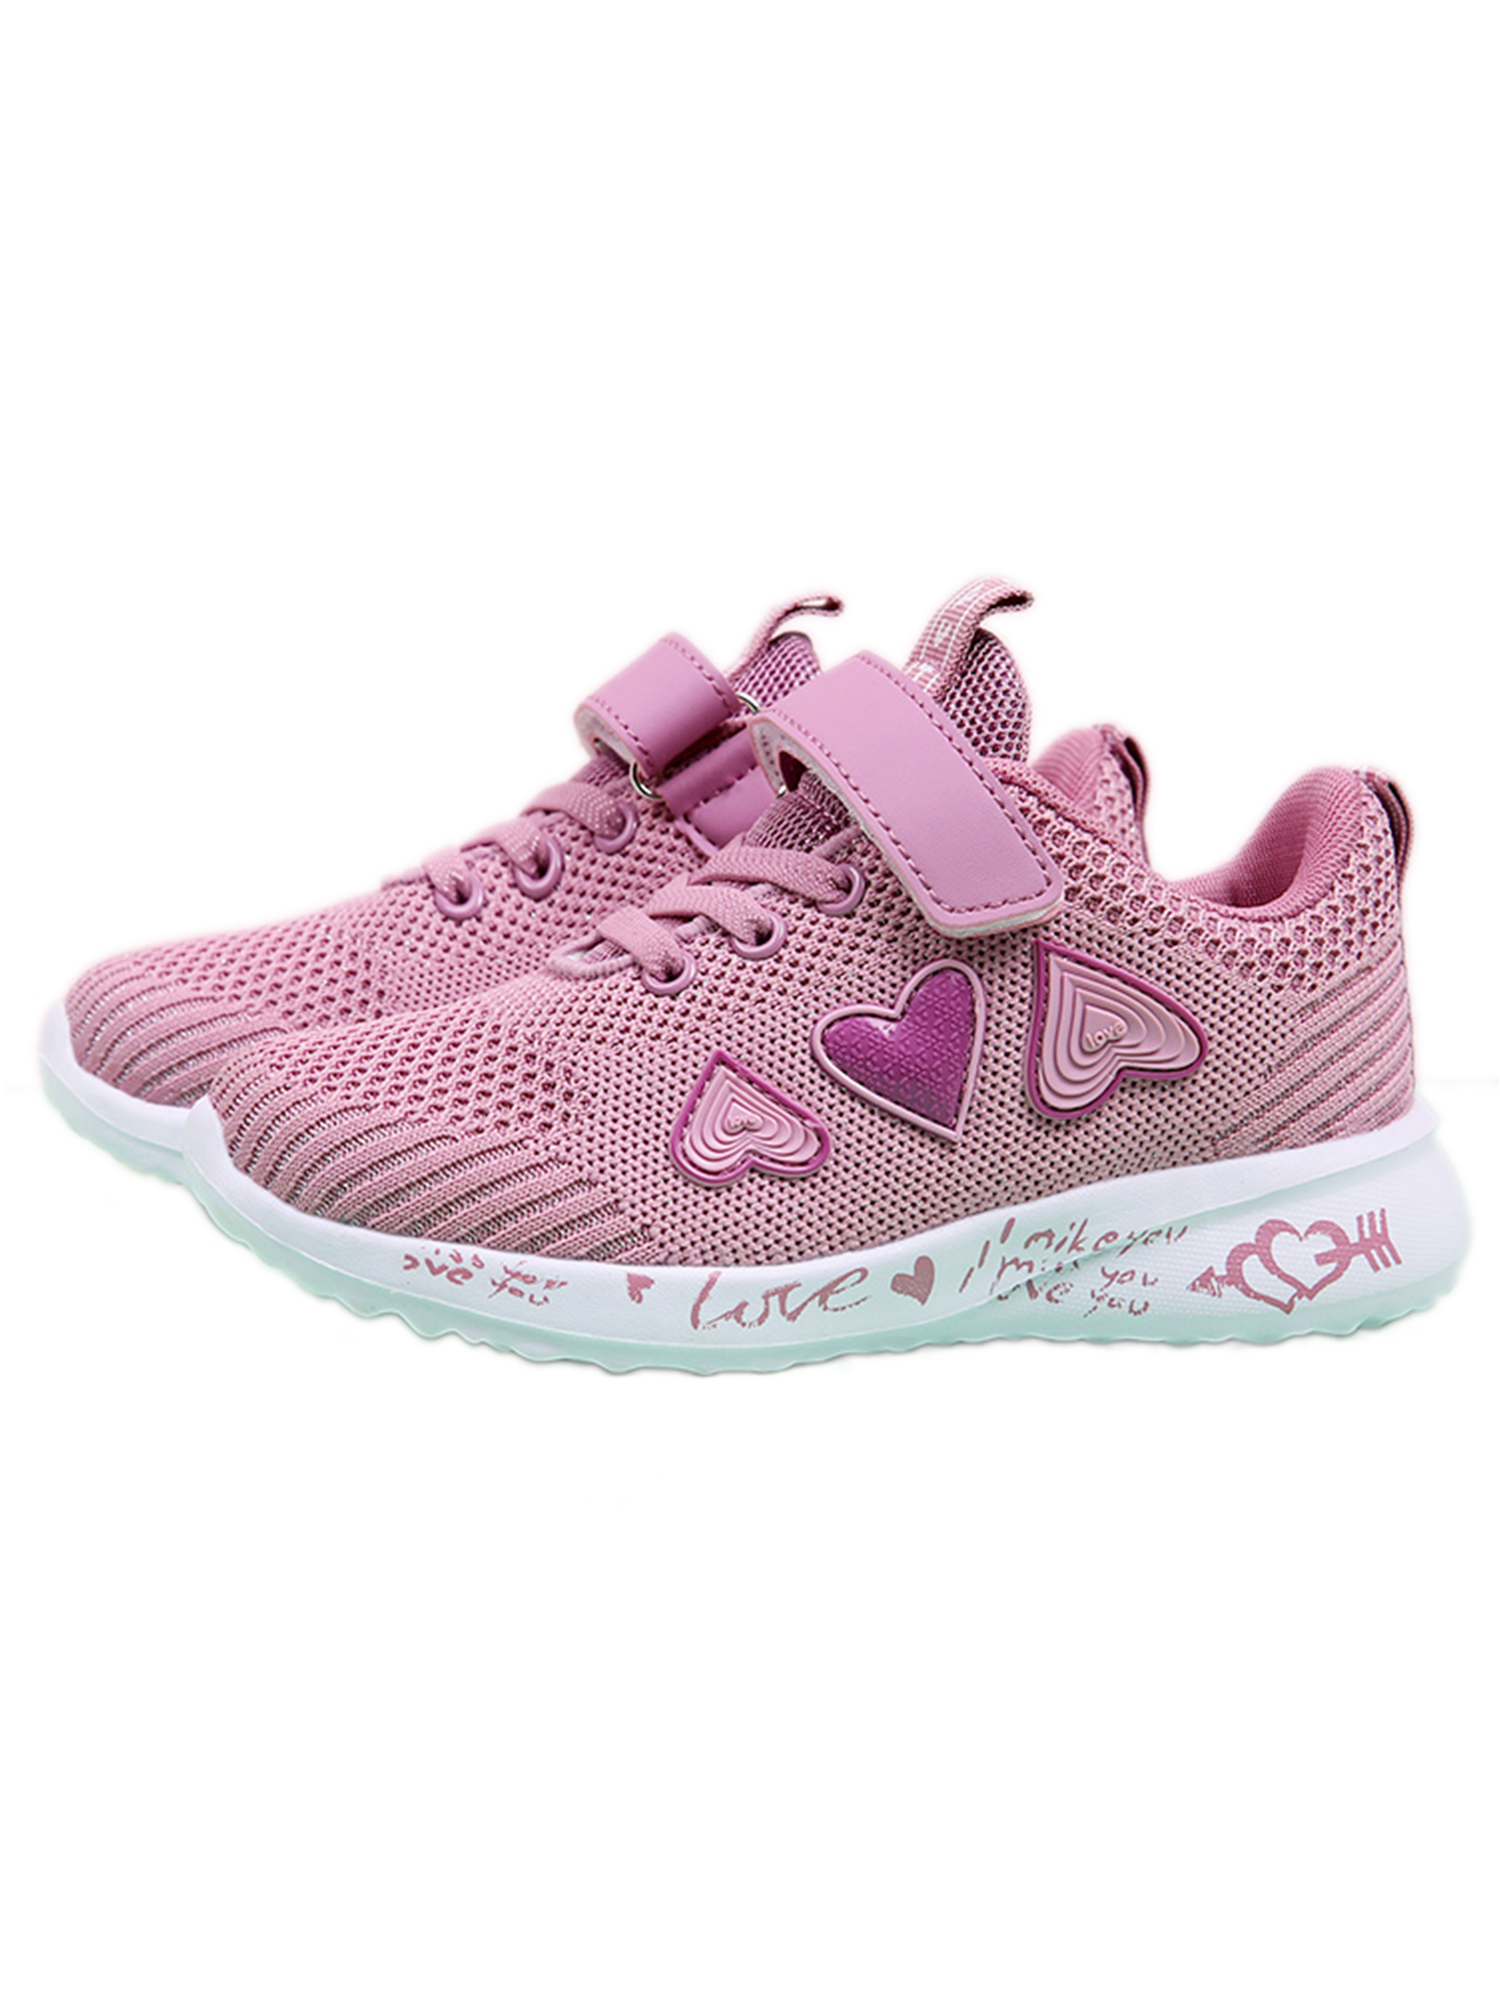 Tanleewa Lovely Girls Sports Shoes Kids Breathable Sneakers Lightweight Casual Shoe Size 3 - image 5 of 7